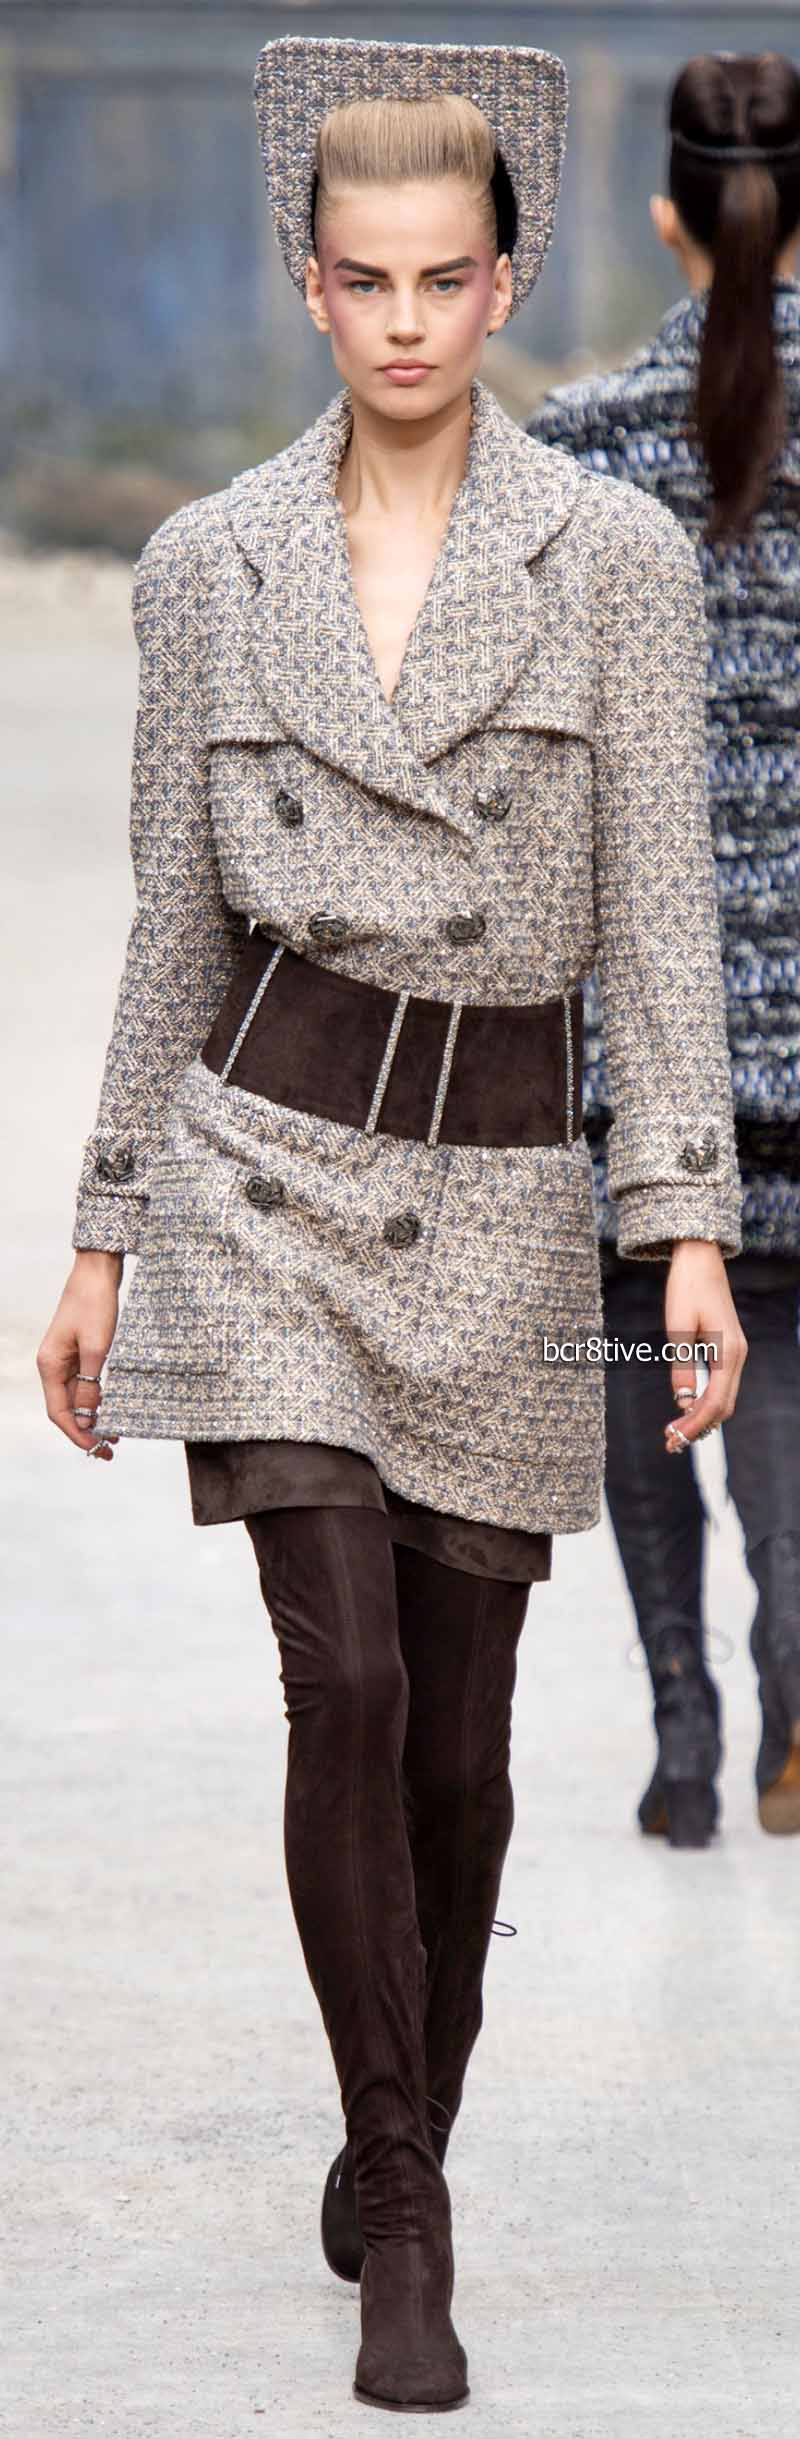 Chanel Fall Winter 2013-14 Haute Couture Collection – Be Creative